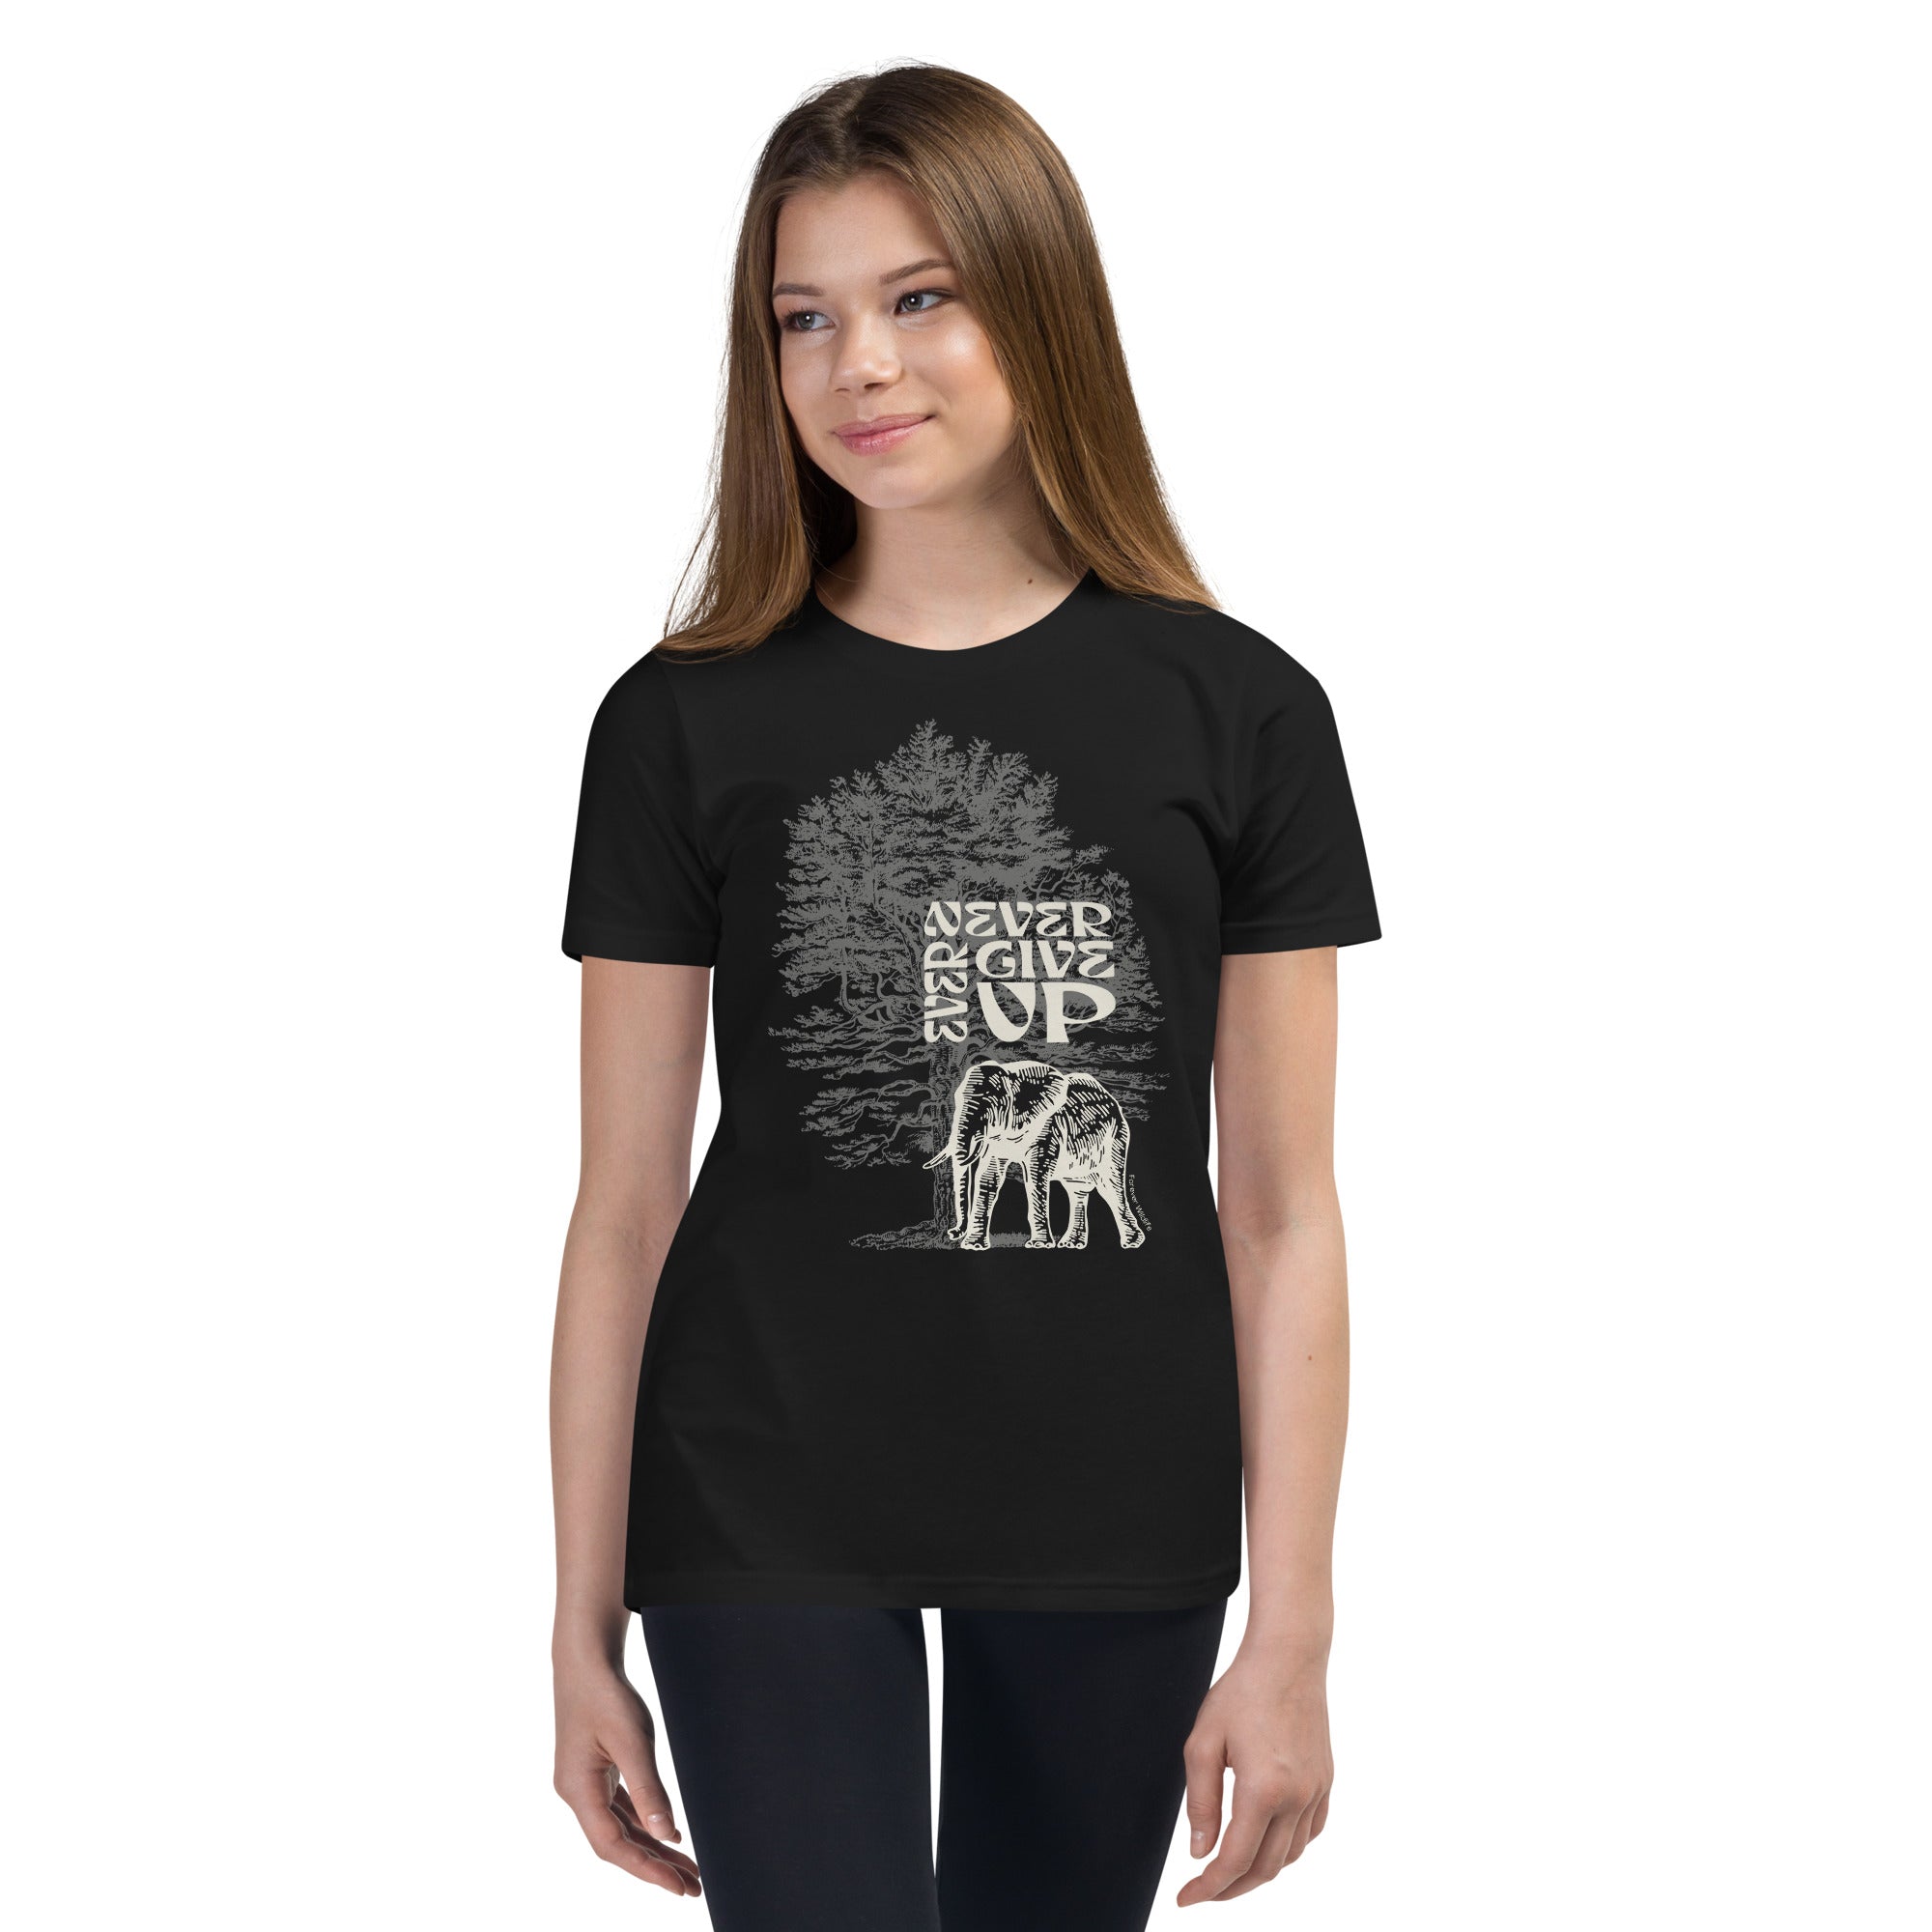 Teen wearing Black Elephant Youth T-Shirt with Elephant graphic as part of Wildlife T Shirts, Wildlife Clothing & Apparel by Forever Wildlife